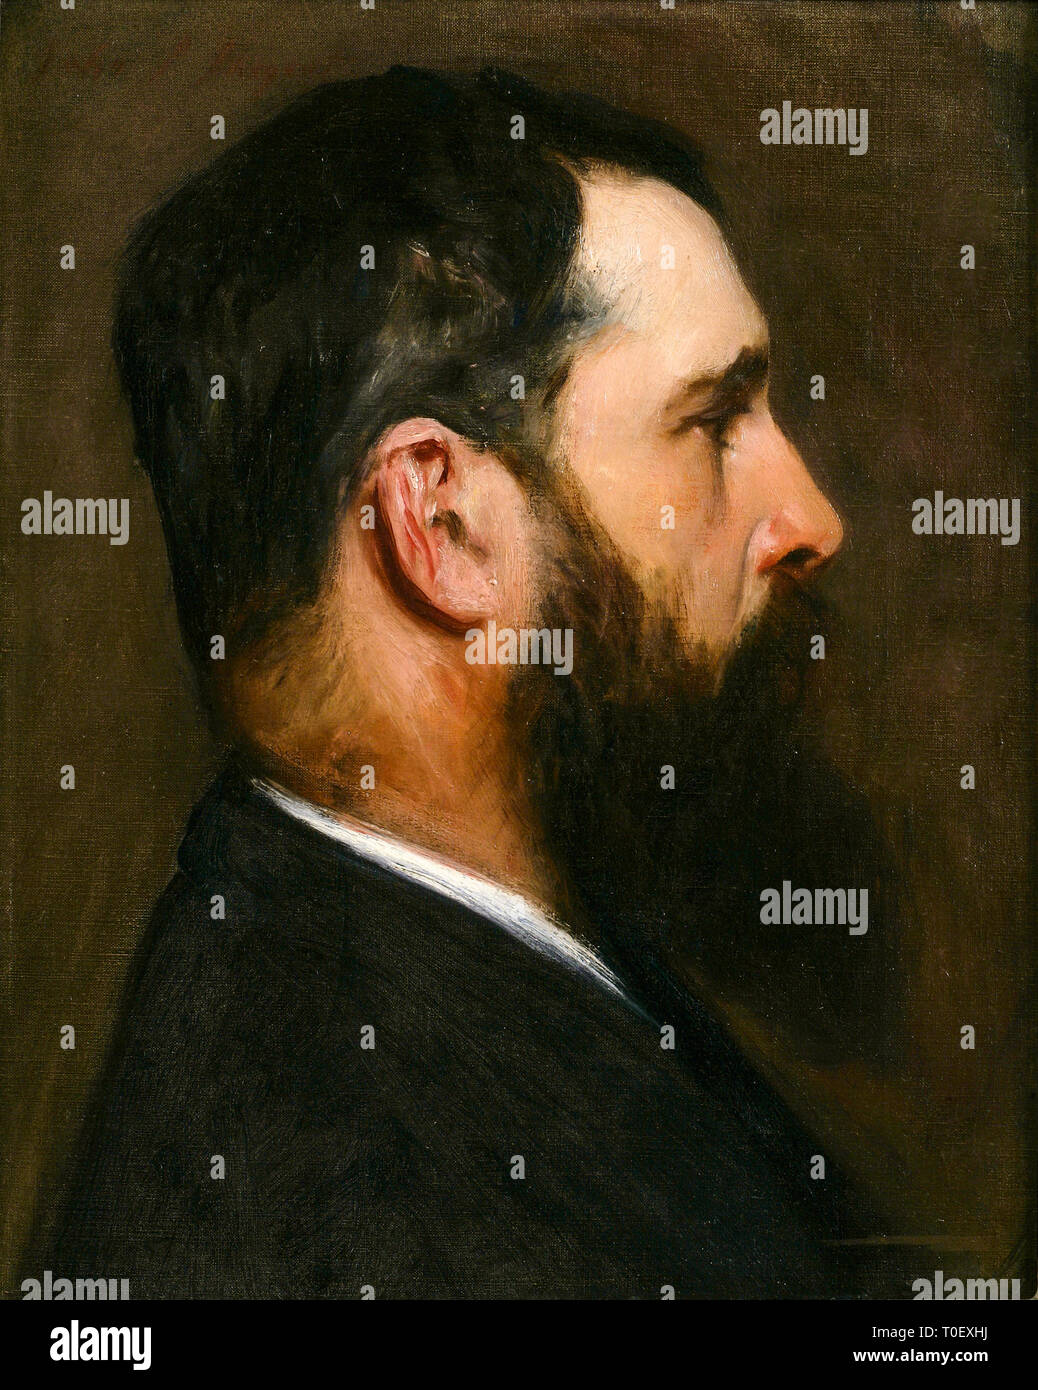 John Singer Sargent, Portrait painting of the French Impressionist artist Claude Monet in oil on canvas, 1887 Stock Photo